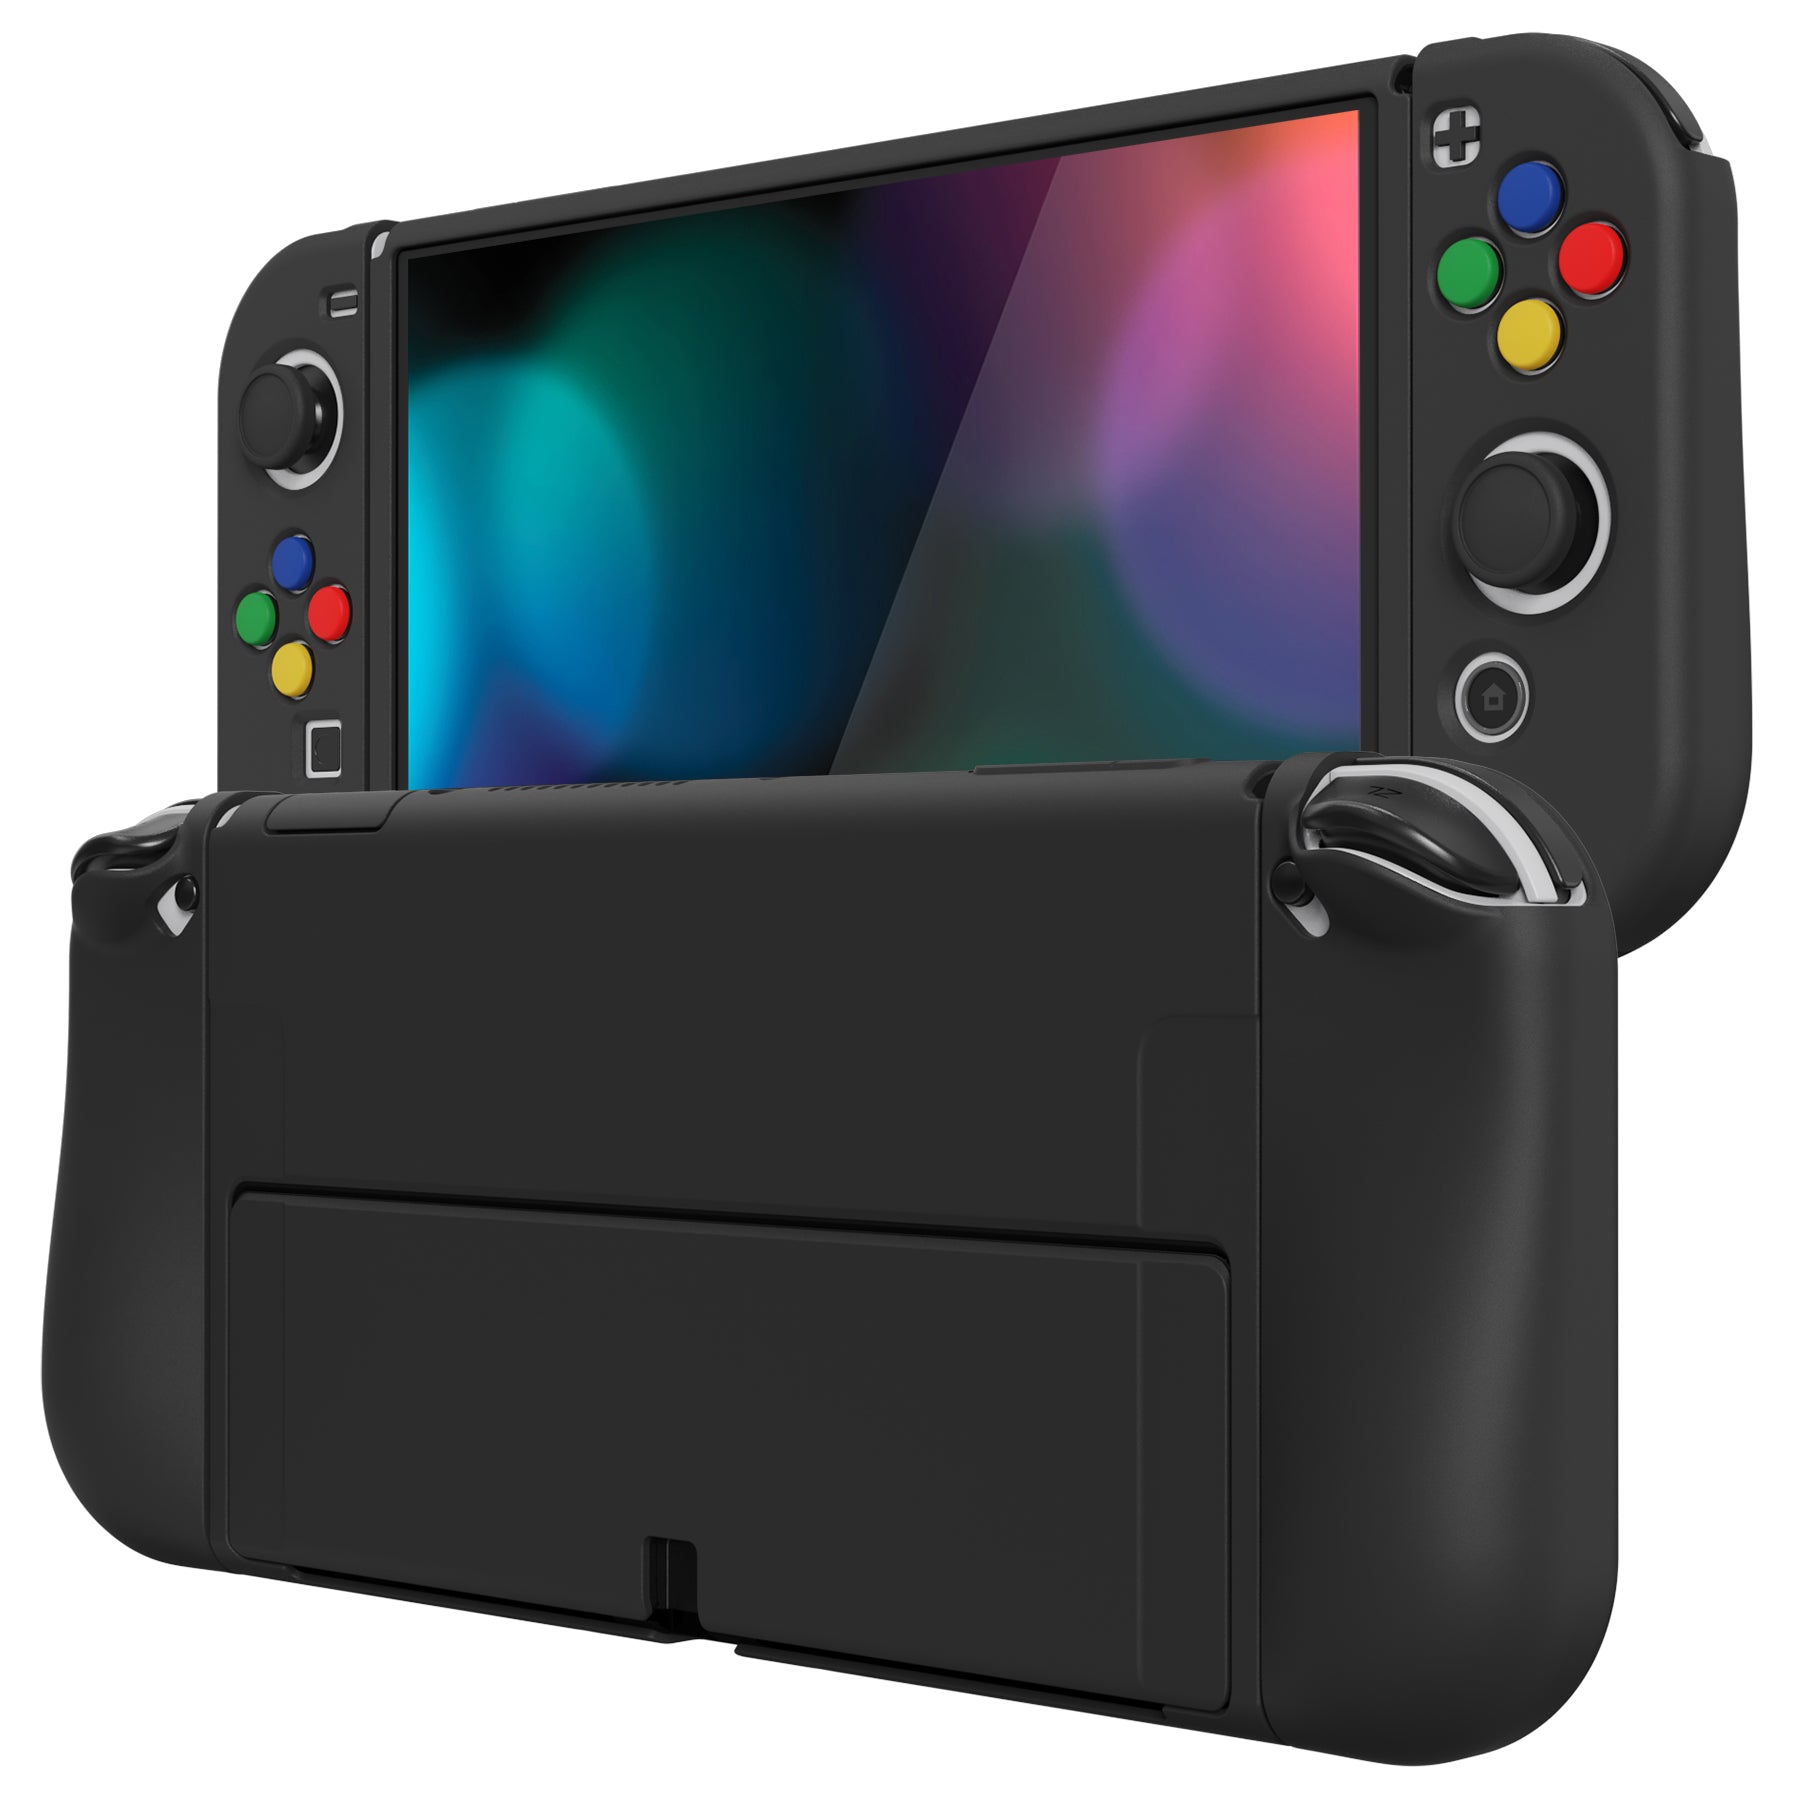 PlayVital ZealProtect Soft Protective Case for Switch OLED, Flexible Protector Joycon Grip Cover for Switch OLED with Thumb Grip Caps & ABXY Direction Button Caps - Black -XSOYM5001 playvital